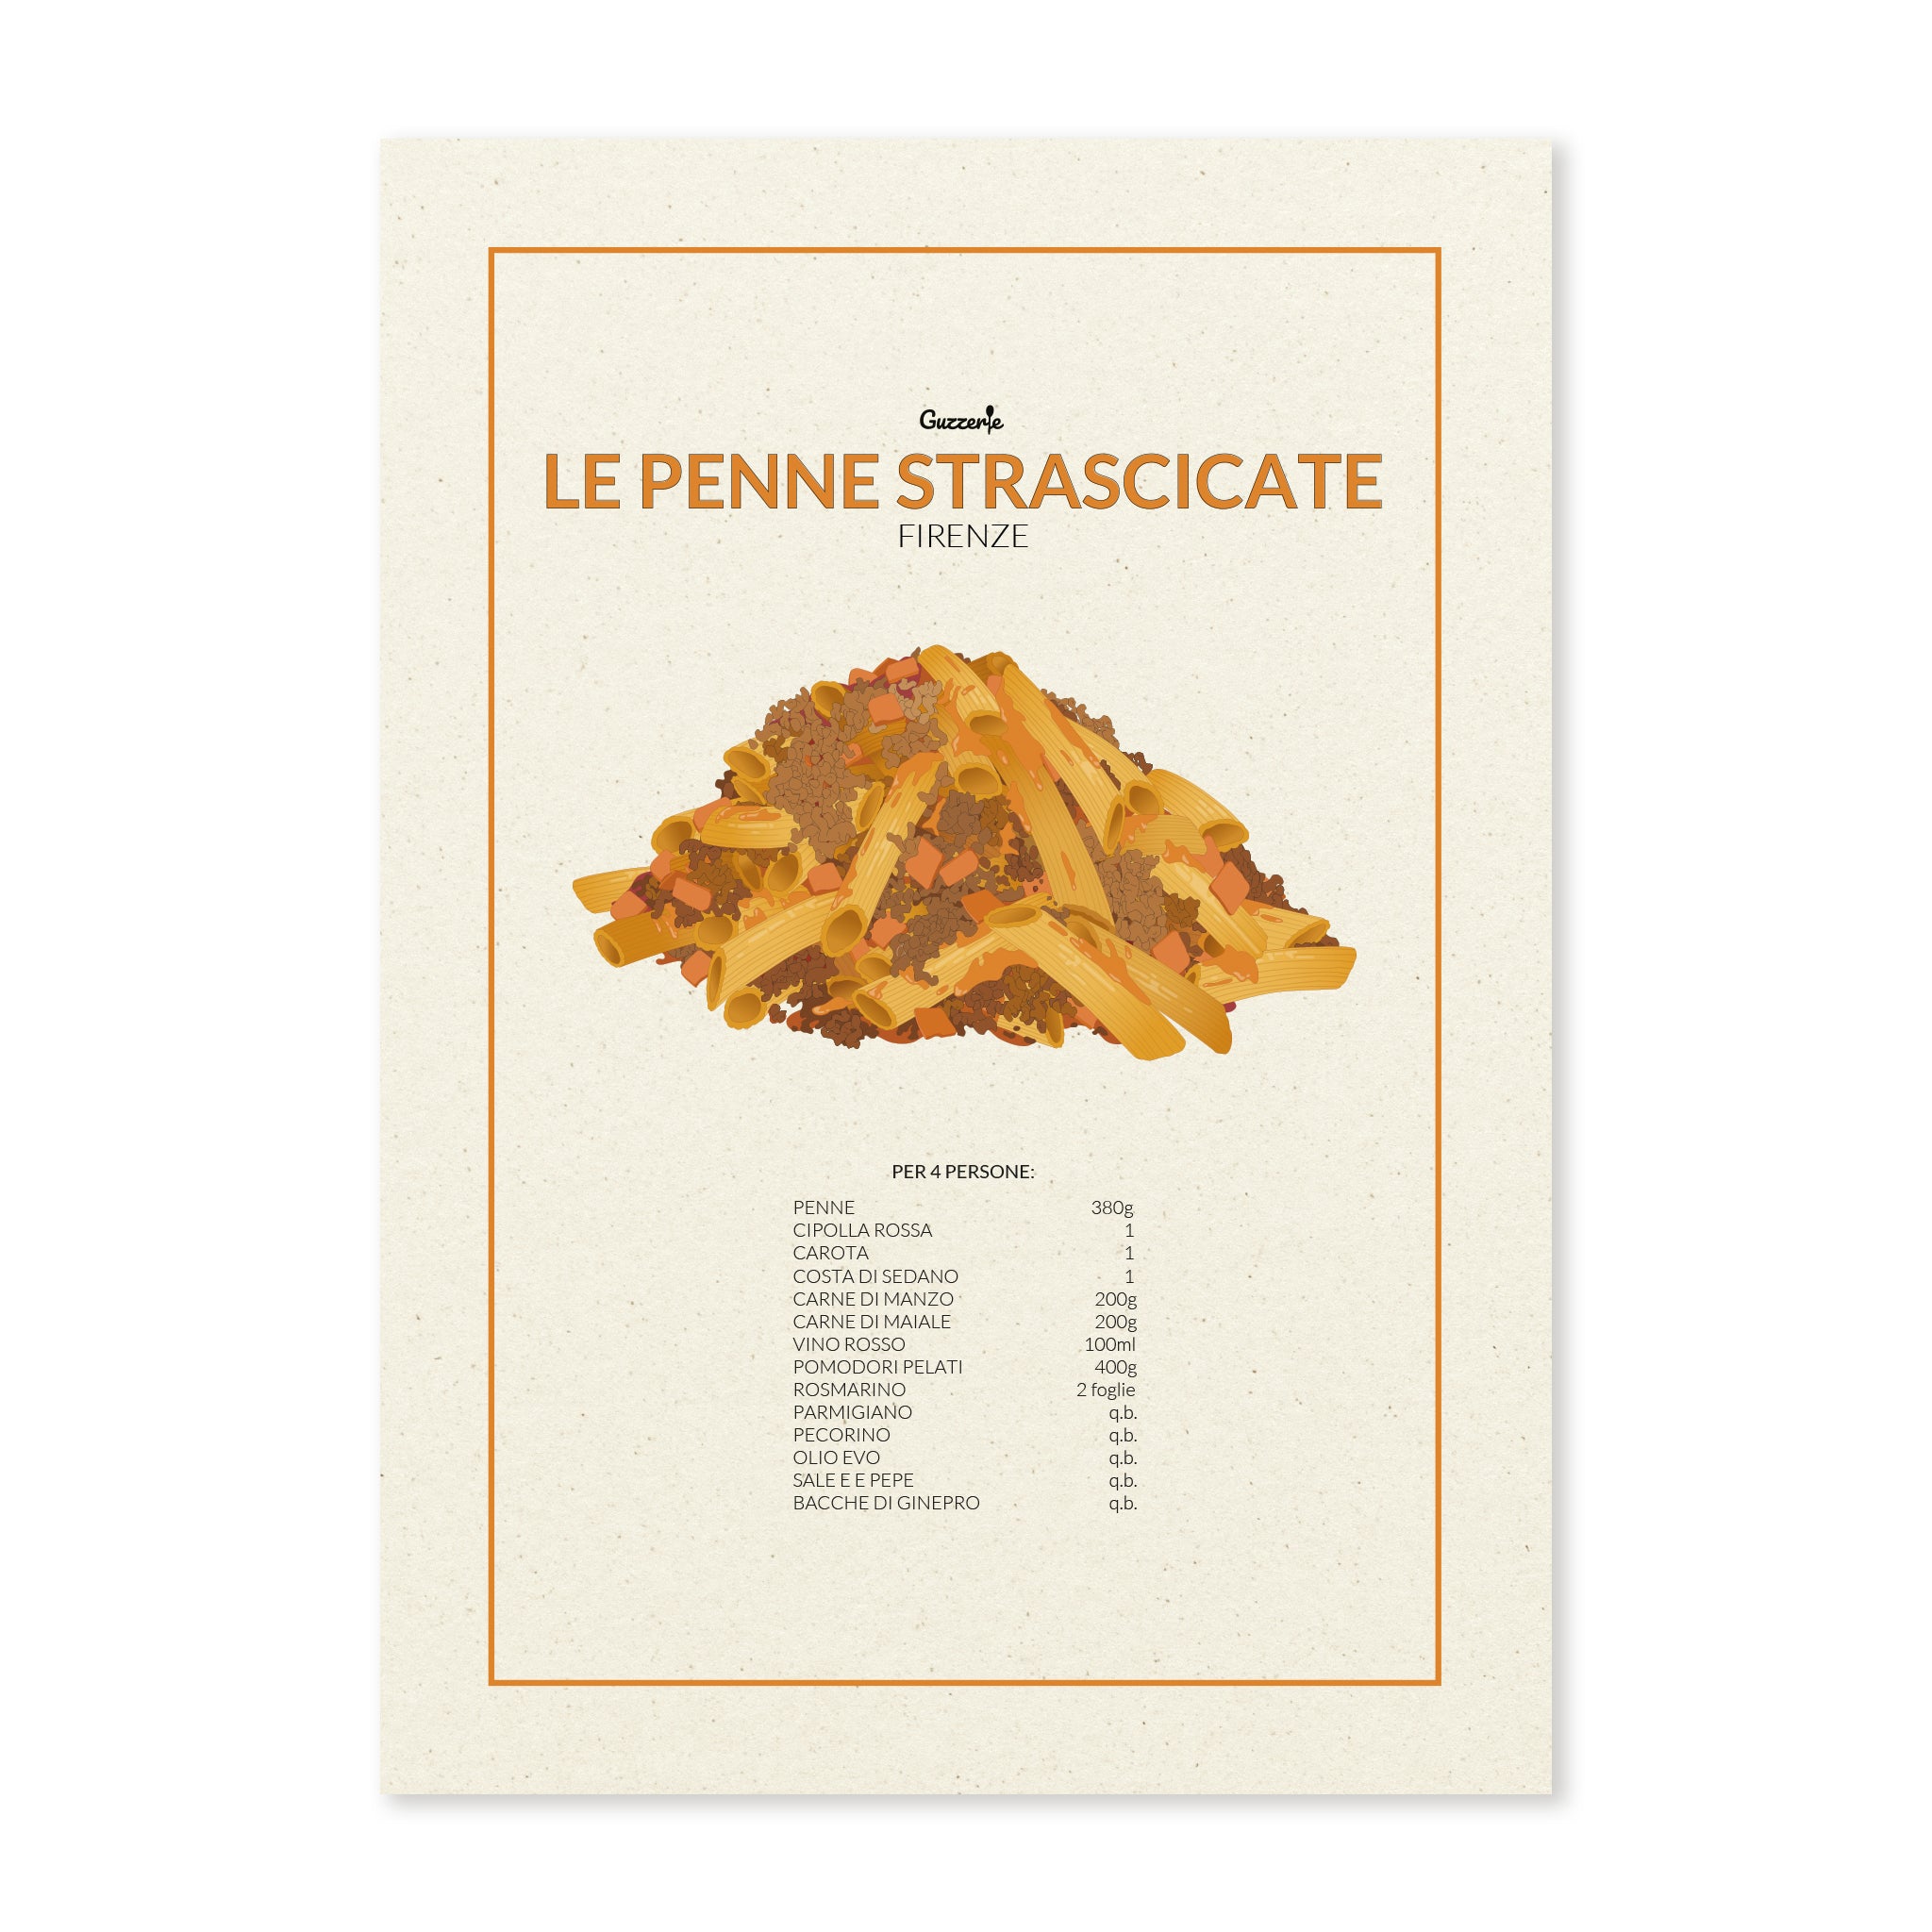 Iconic Poster of Penne Strascicate | Guzzerie